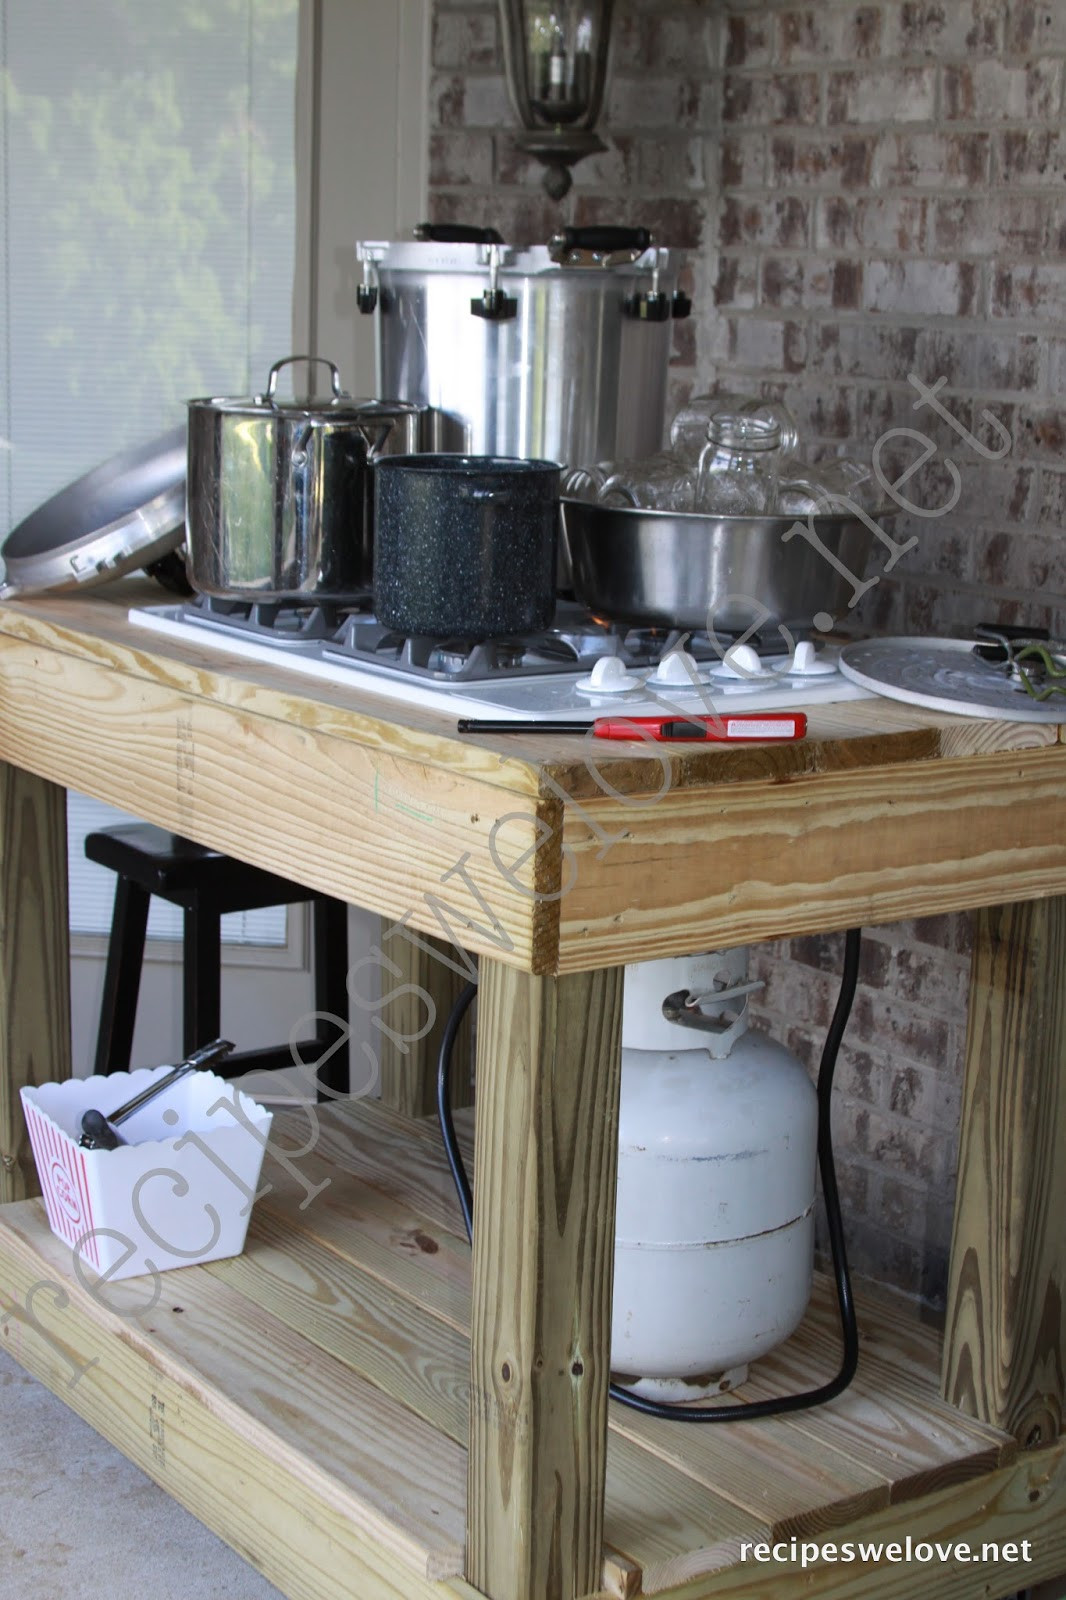 Outdoor Kitchen Stove
 Recipes We Love Canning Stove I am in LOVE would